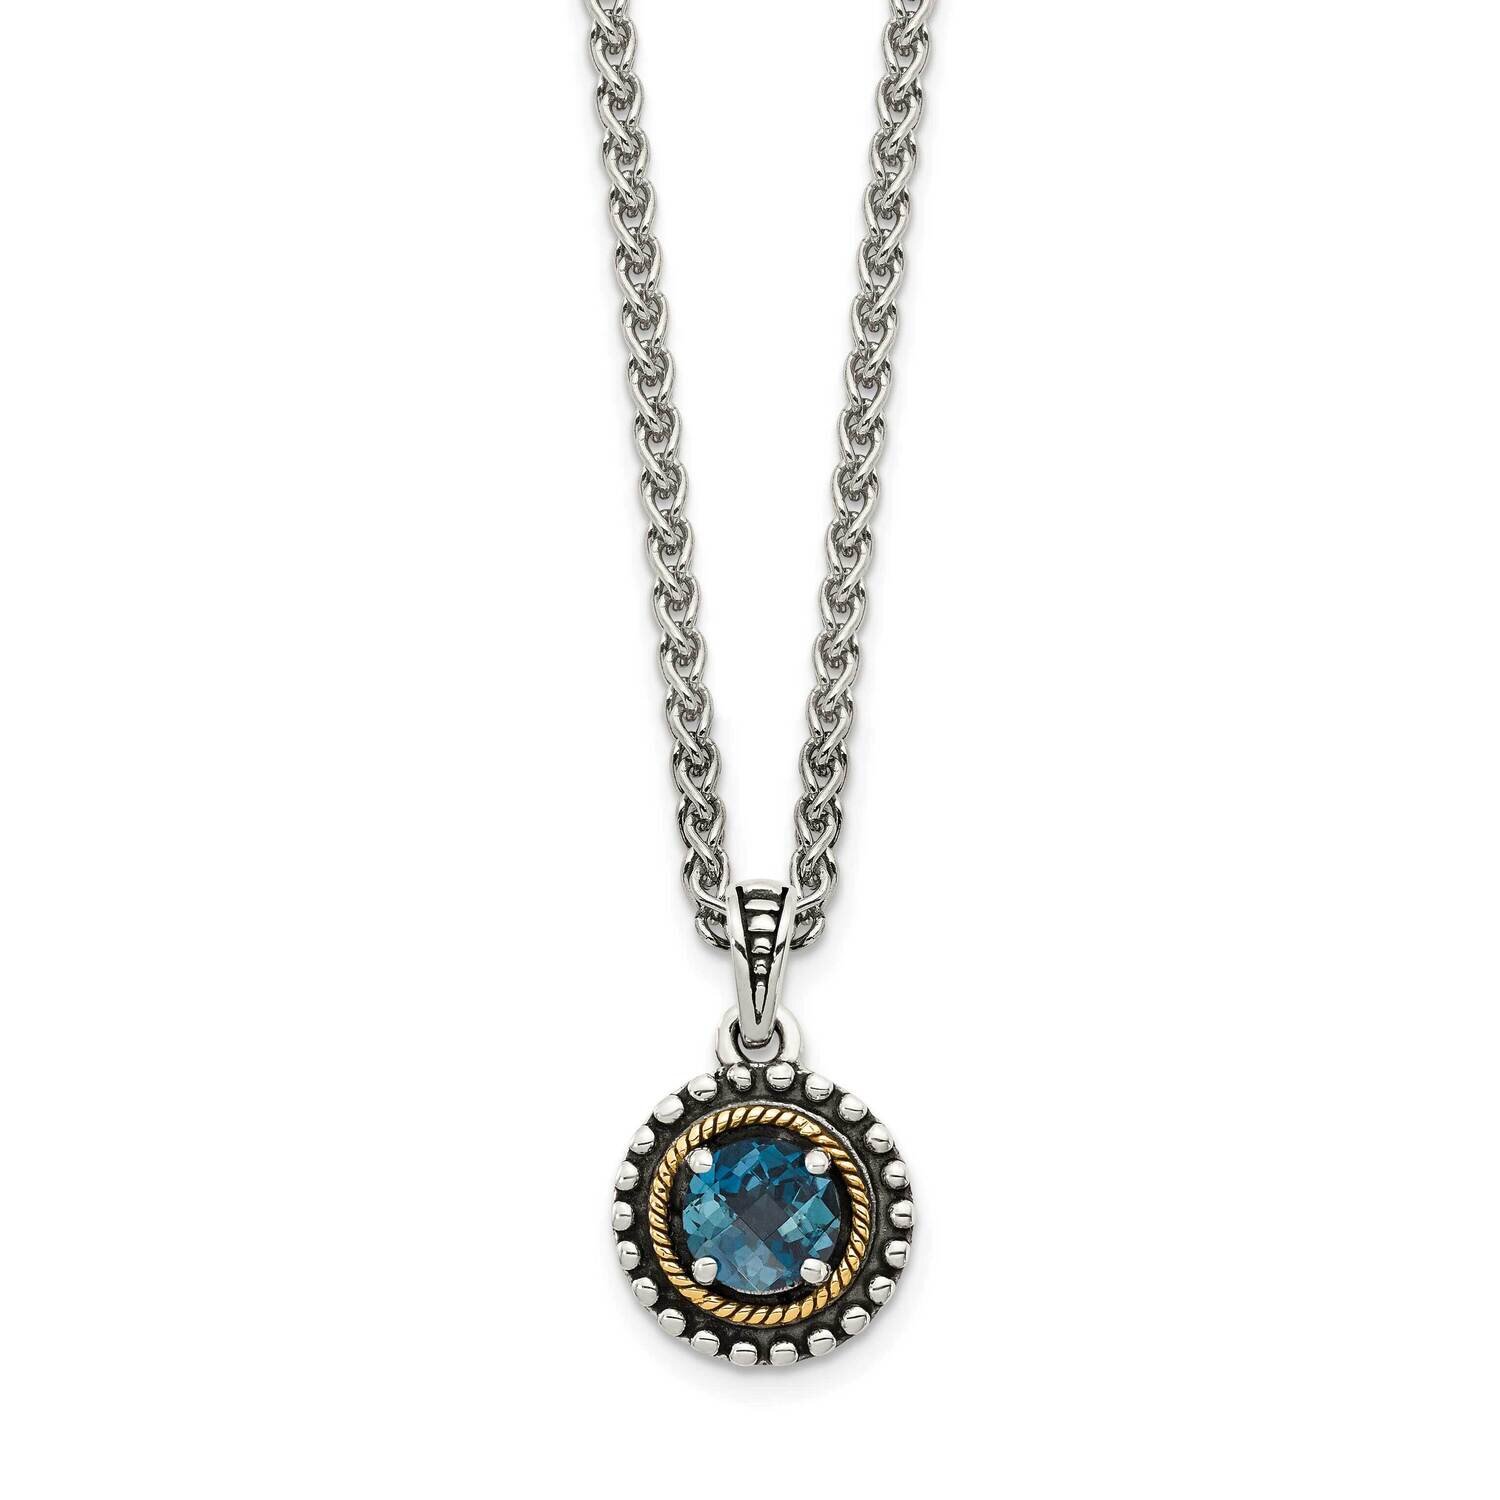 London Blue Topaz Necklace Sterling Silver with 14k Gold Accent QTC1633